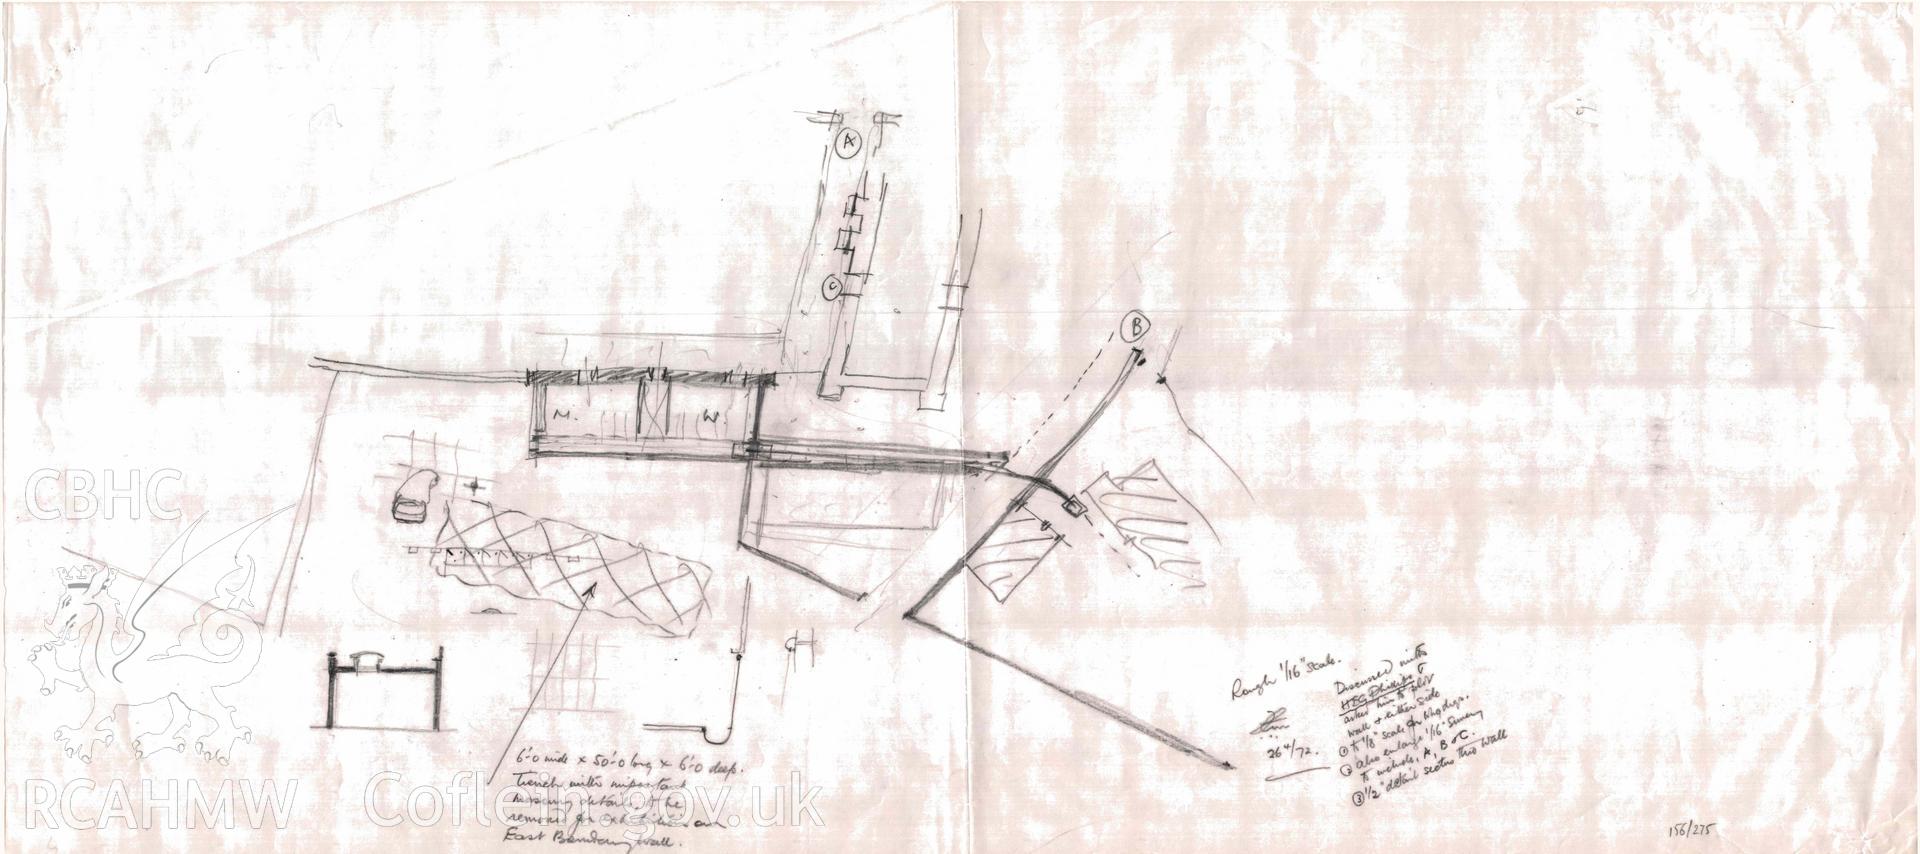 Cadw guardianship monument drawing, rough plan of Beaufort Cottage area, with trench penciled in, Tintern Abbey.  Dated 1972.